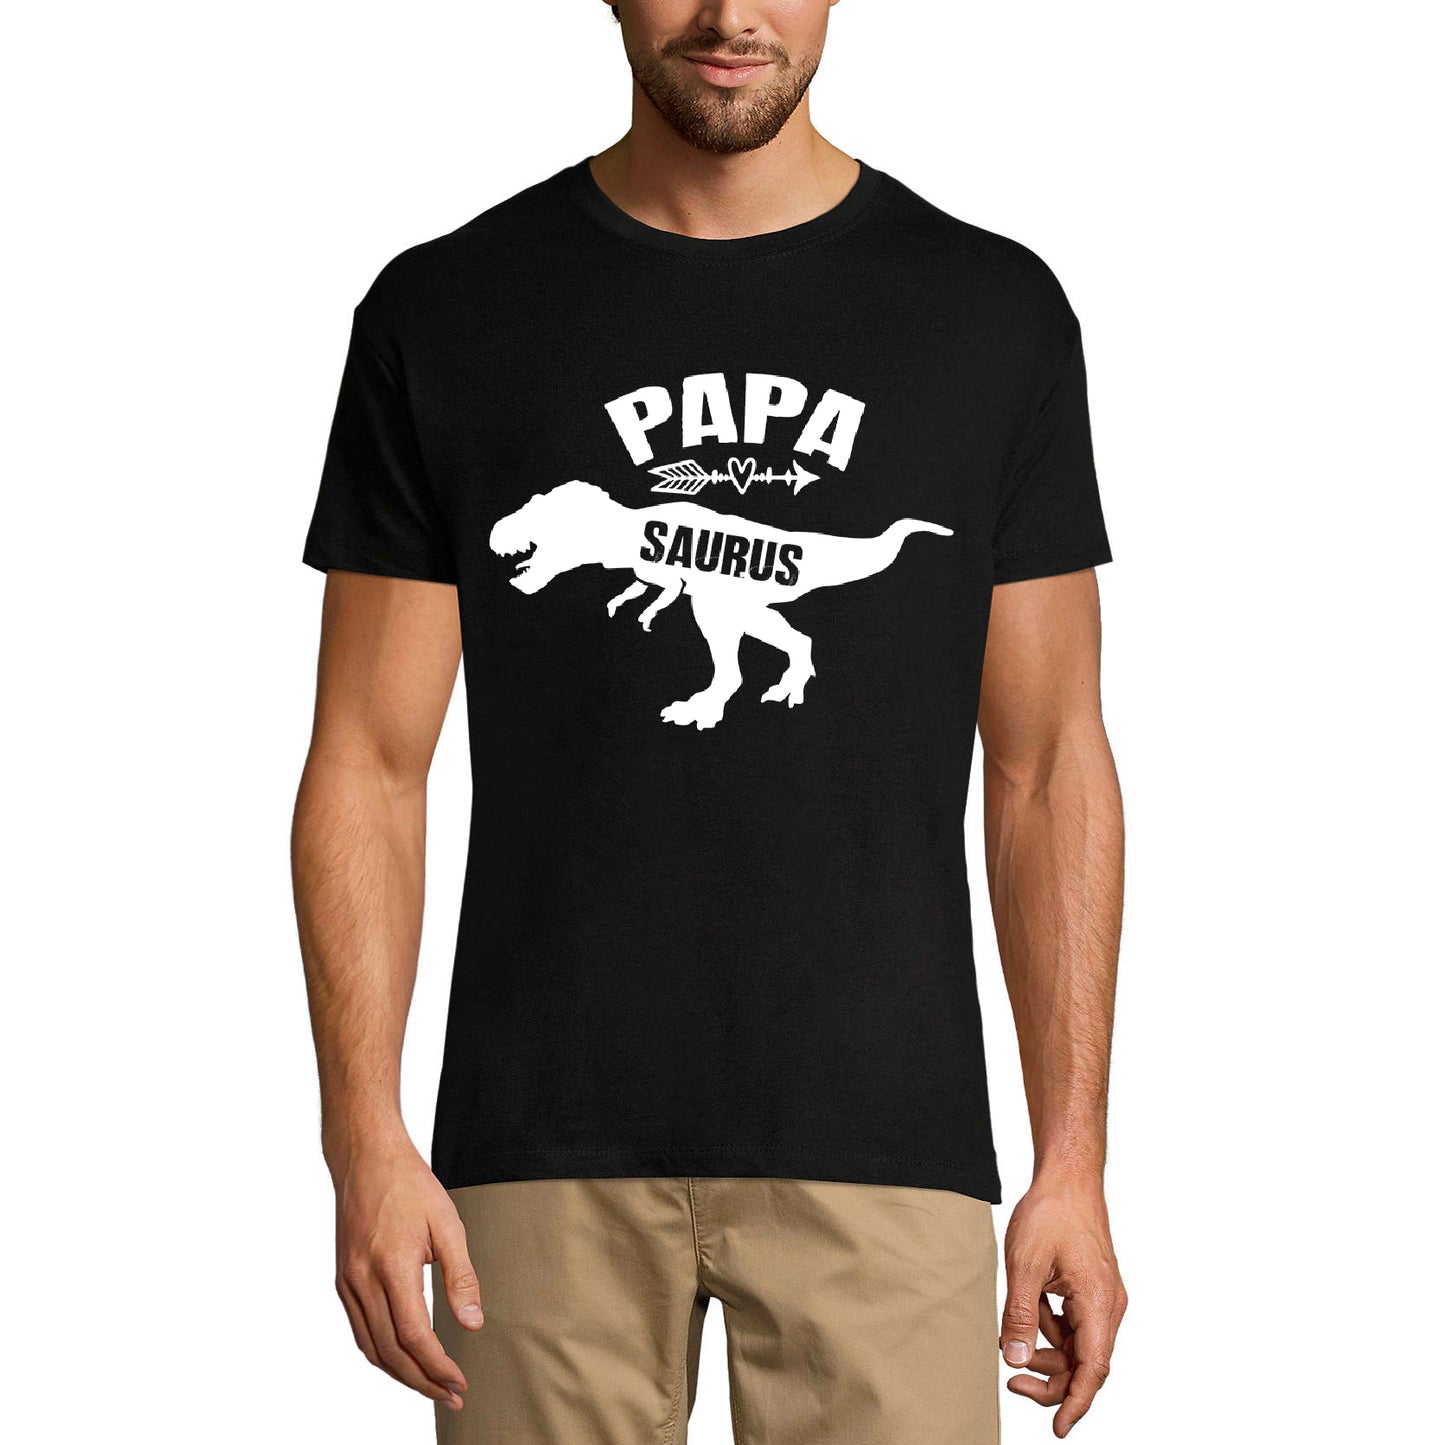 ULTRABASIC Men's Graphic T-Shirt Papa Saurus - Funny Vintage Shirt - Gift For Father's Day